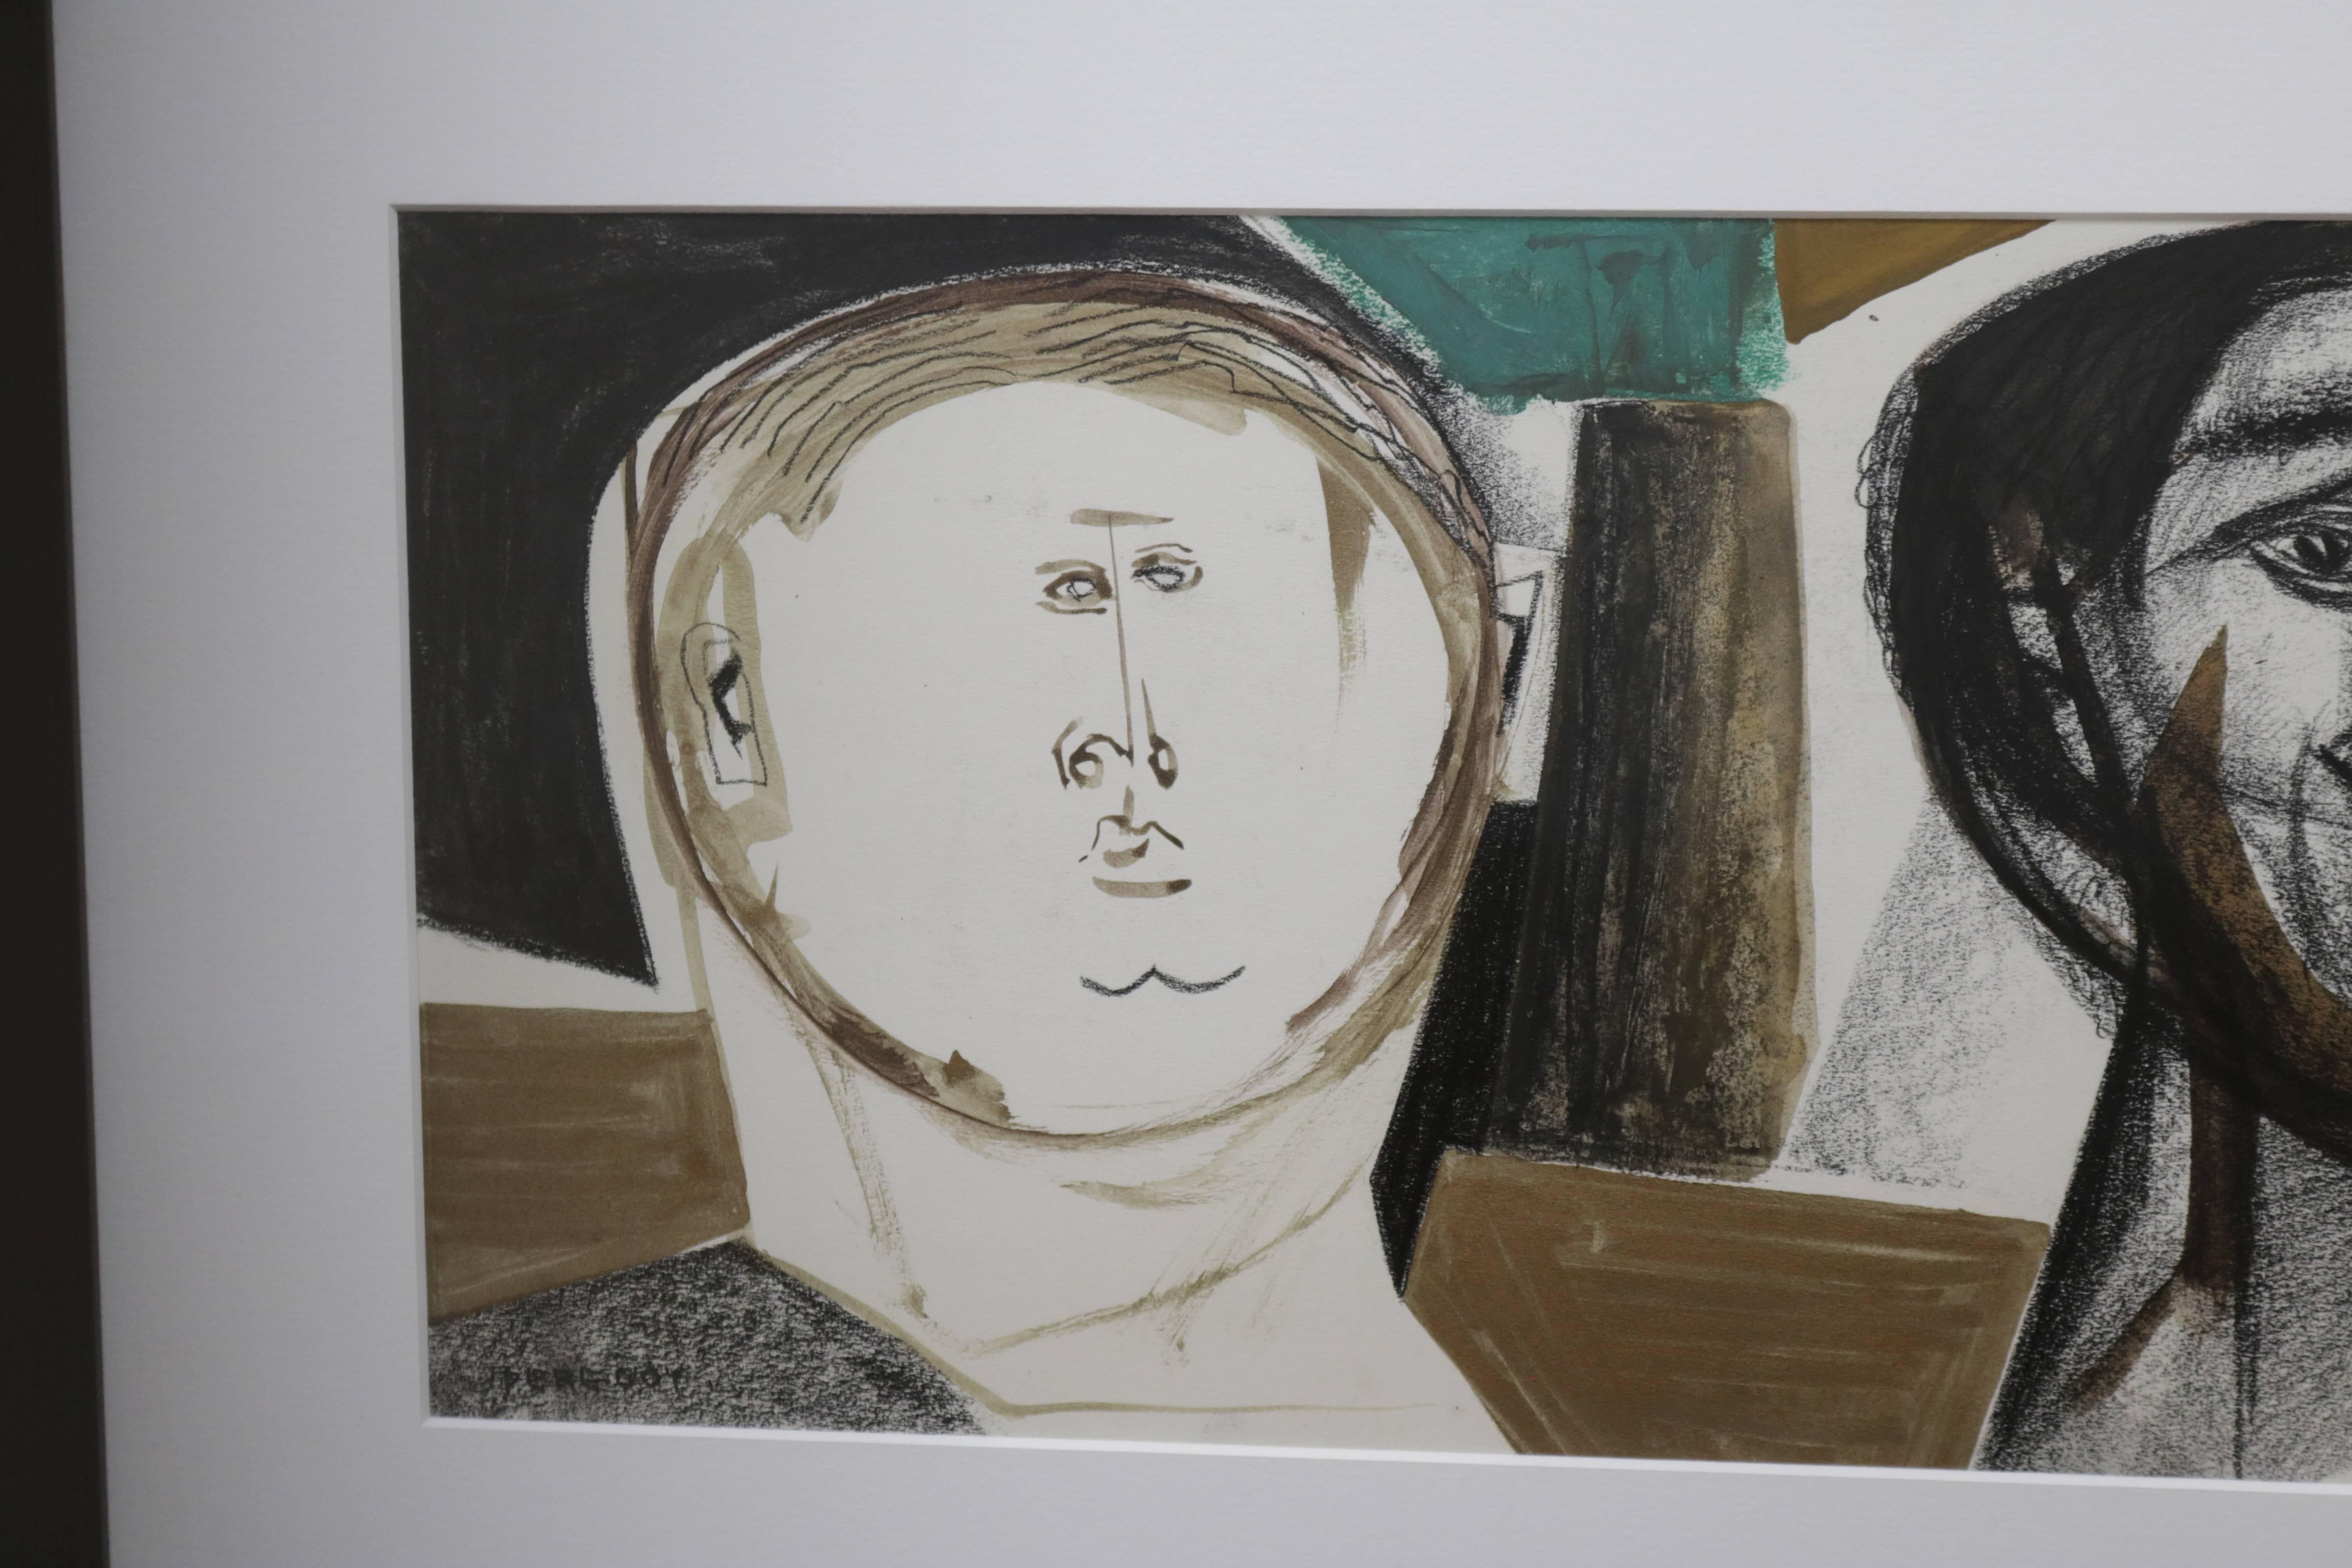 Mid-Century Modern Mixed-Media Portrait of Two Men by Walter Peregoy